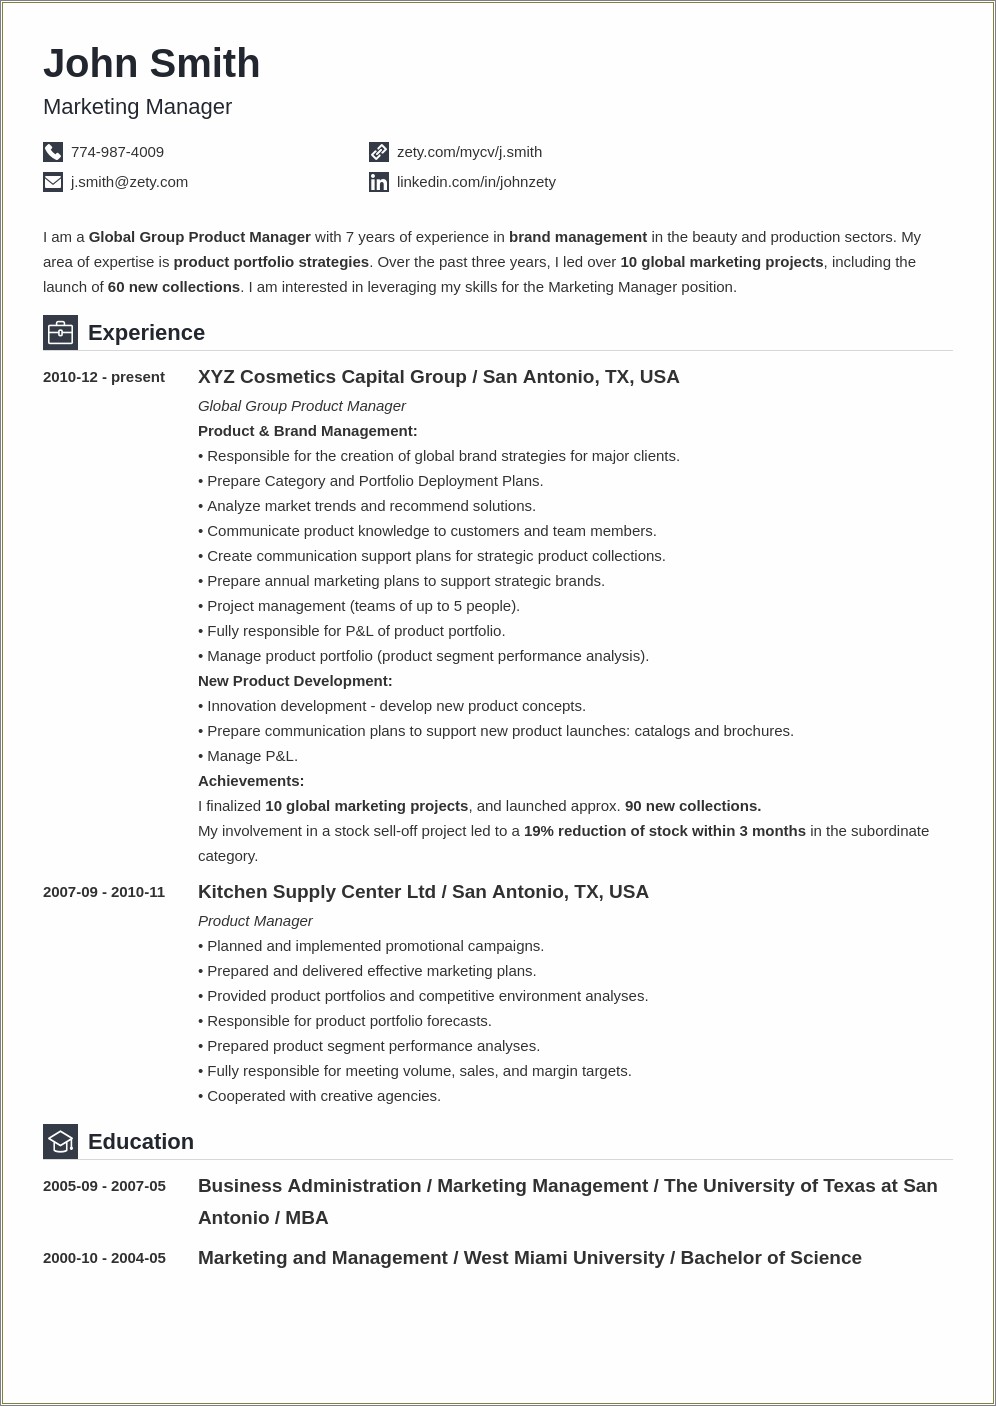 Resume Qualifications Experience Employment Education References